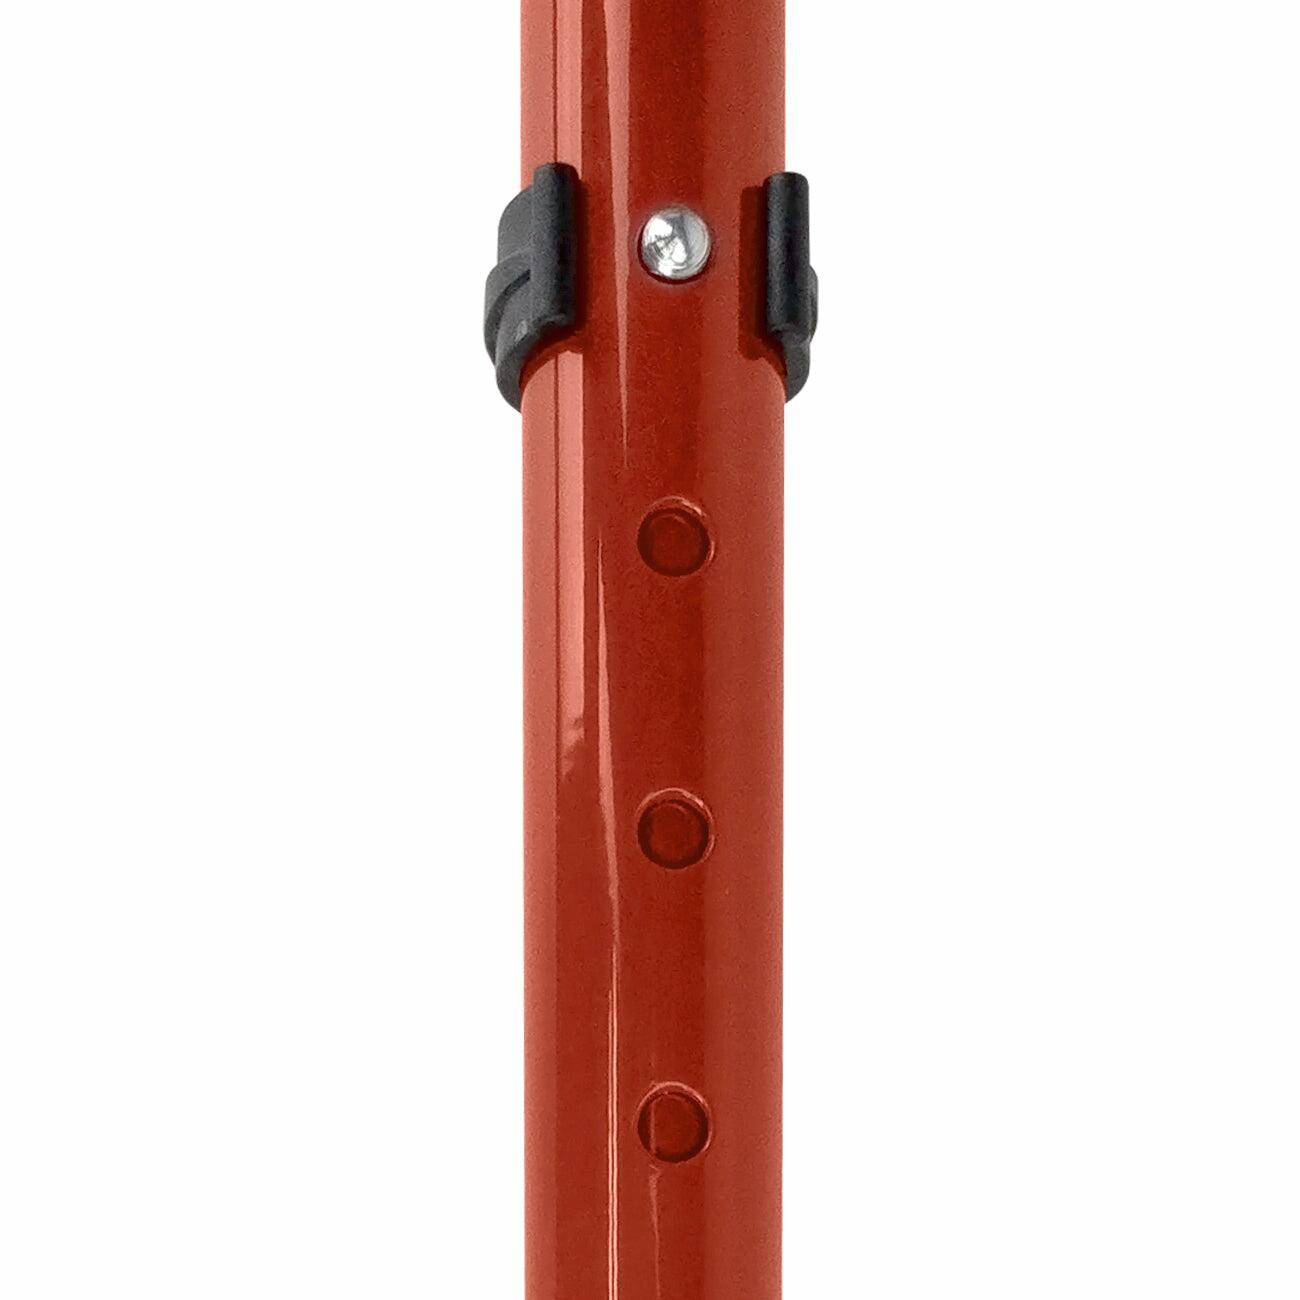 How to adjust a red Flexyfoot Comfort Grip Double Adjustable Crutch